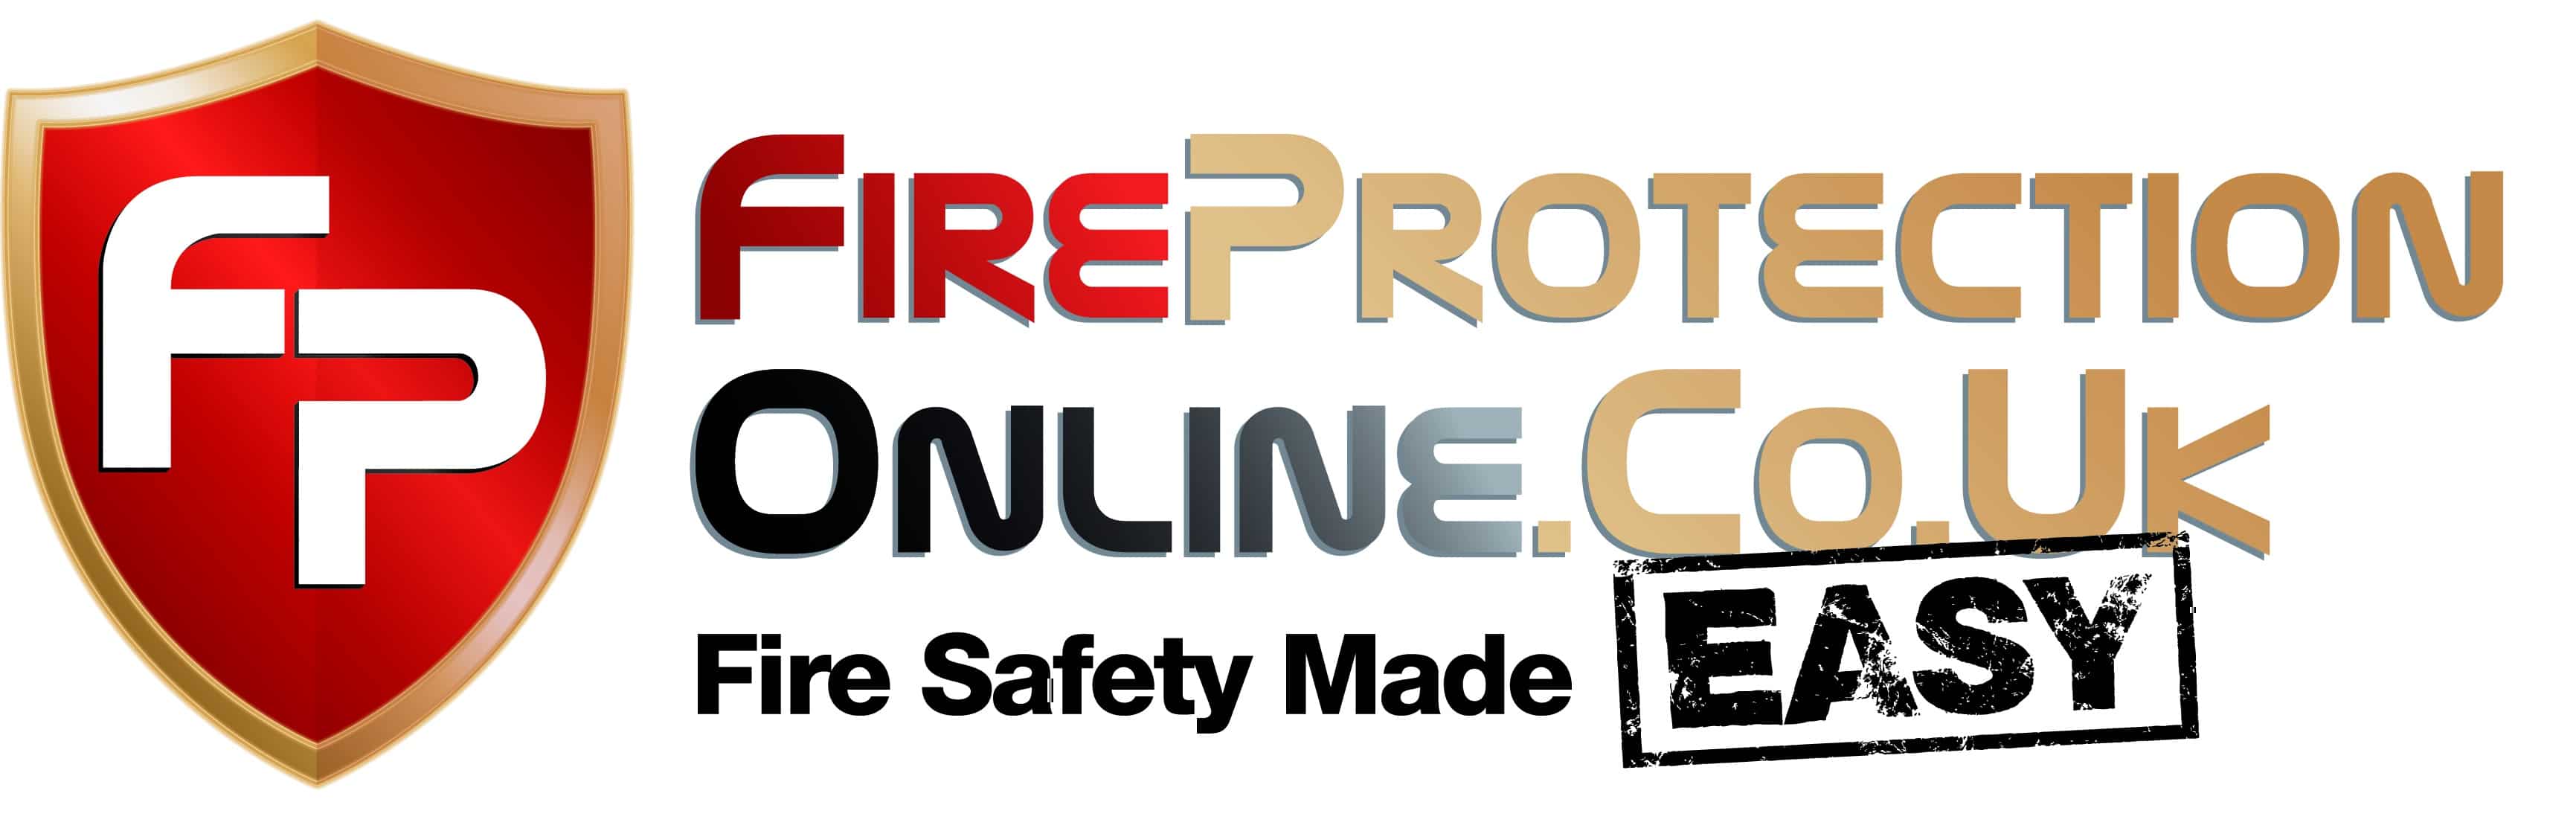 fire protection online logo